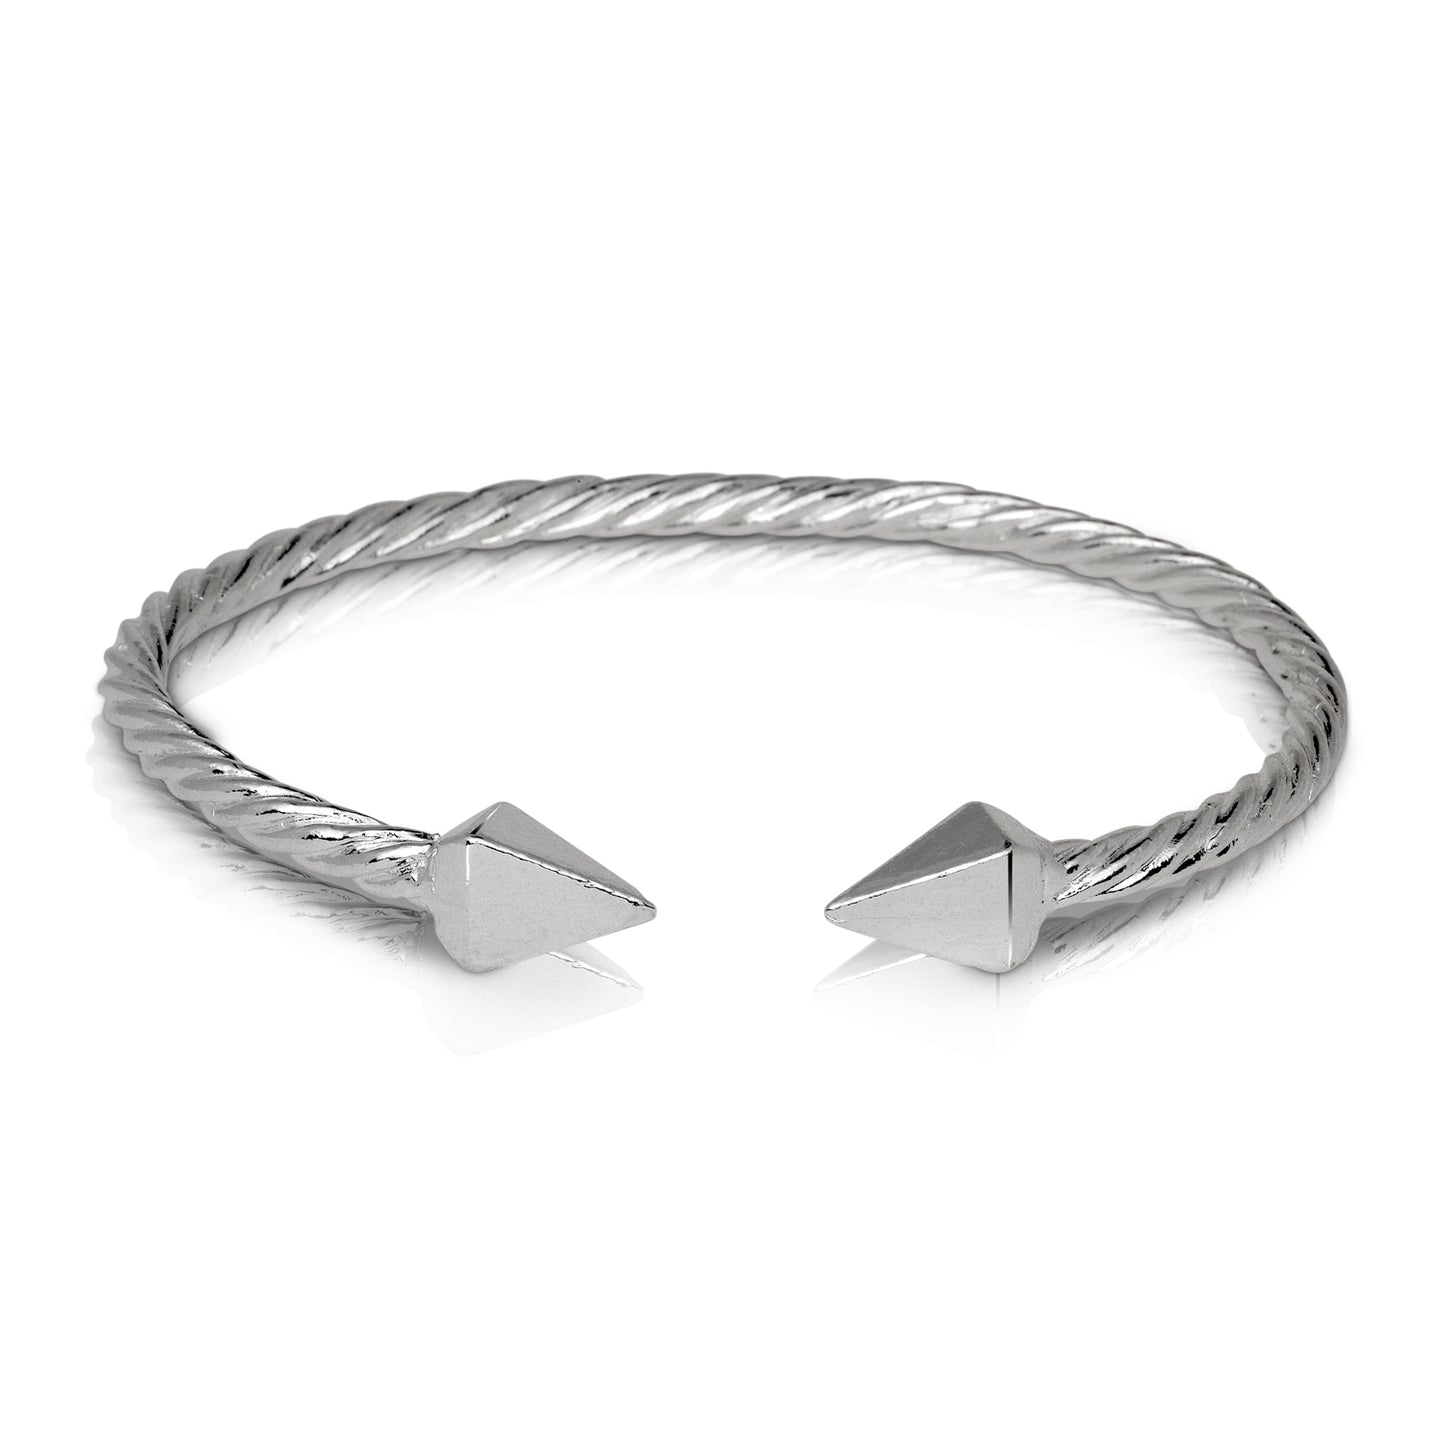 Better Jewelry PYRAMID ENDS COILED ROPE WEST INDIAN BANGLE .925 STERLING SILVER (MADE IN USA), 1 piece